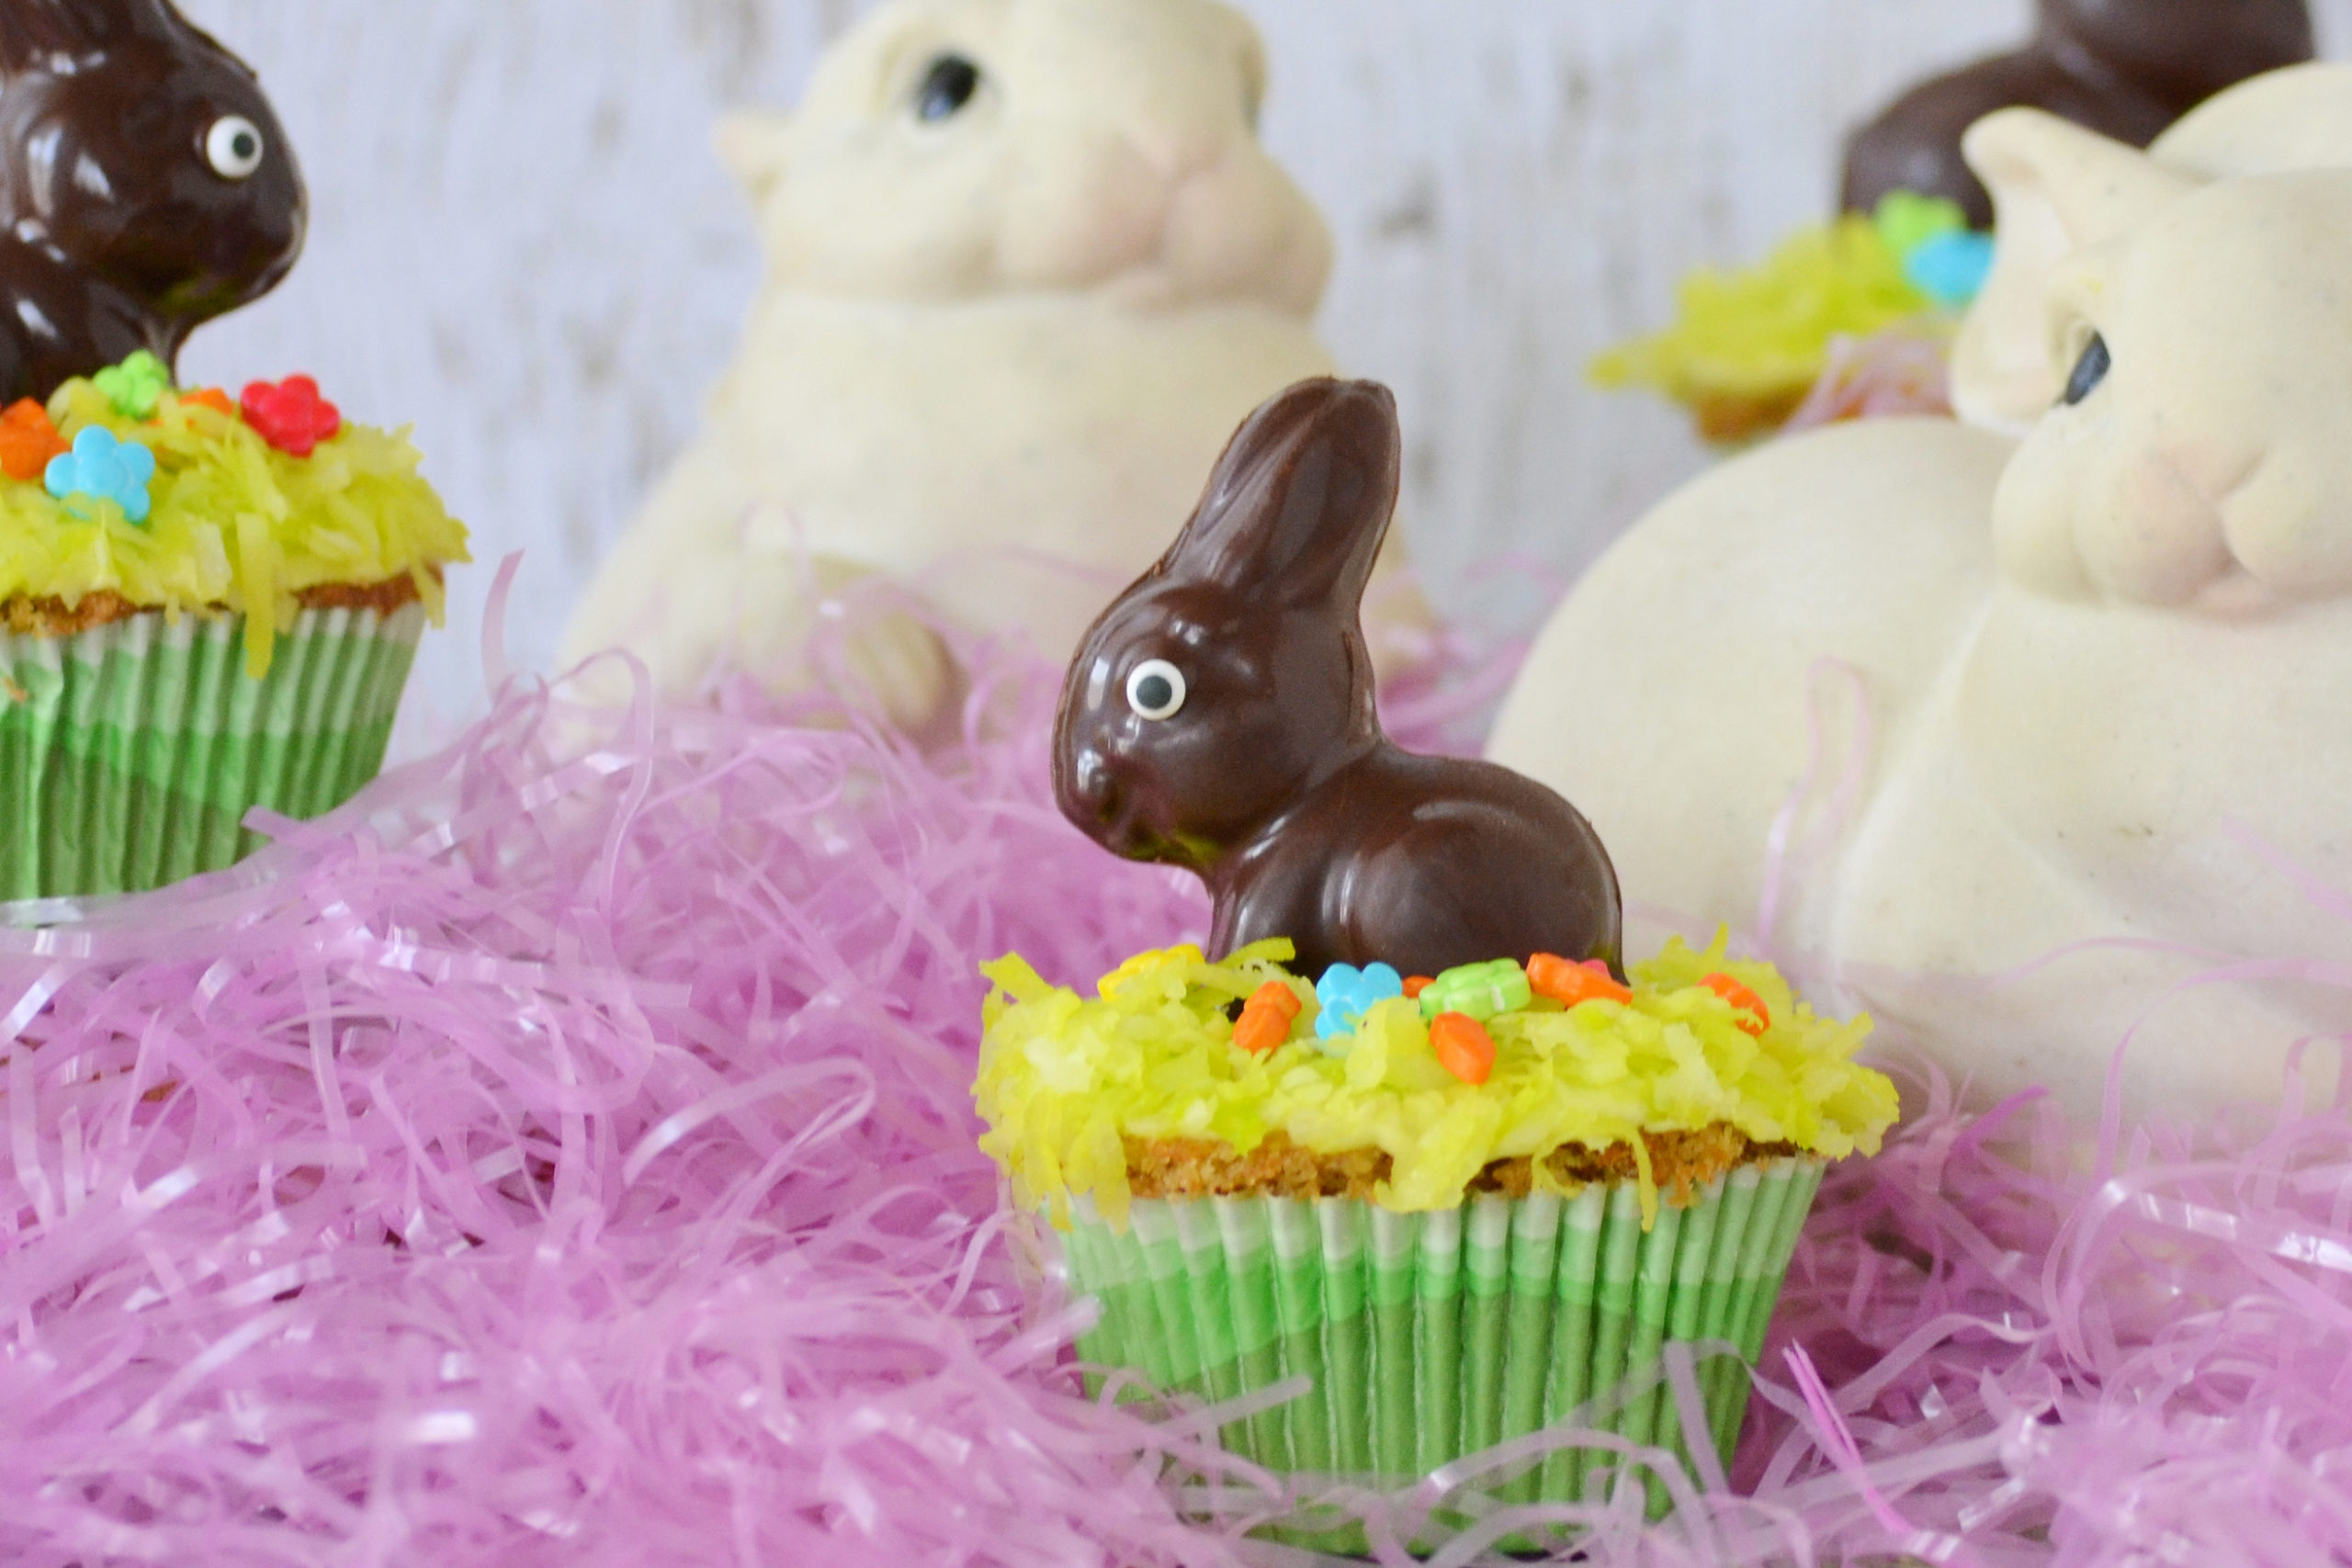 Chocolate Mold Easter Bunnies Using Sculptamold - Crafty Sisters